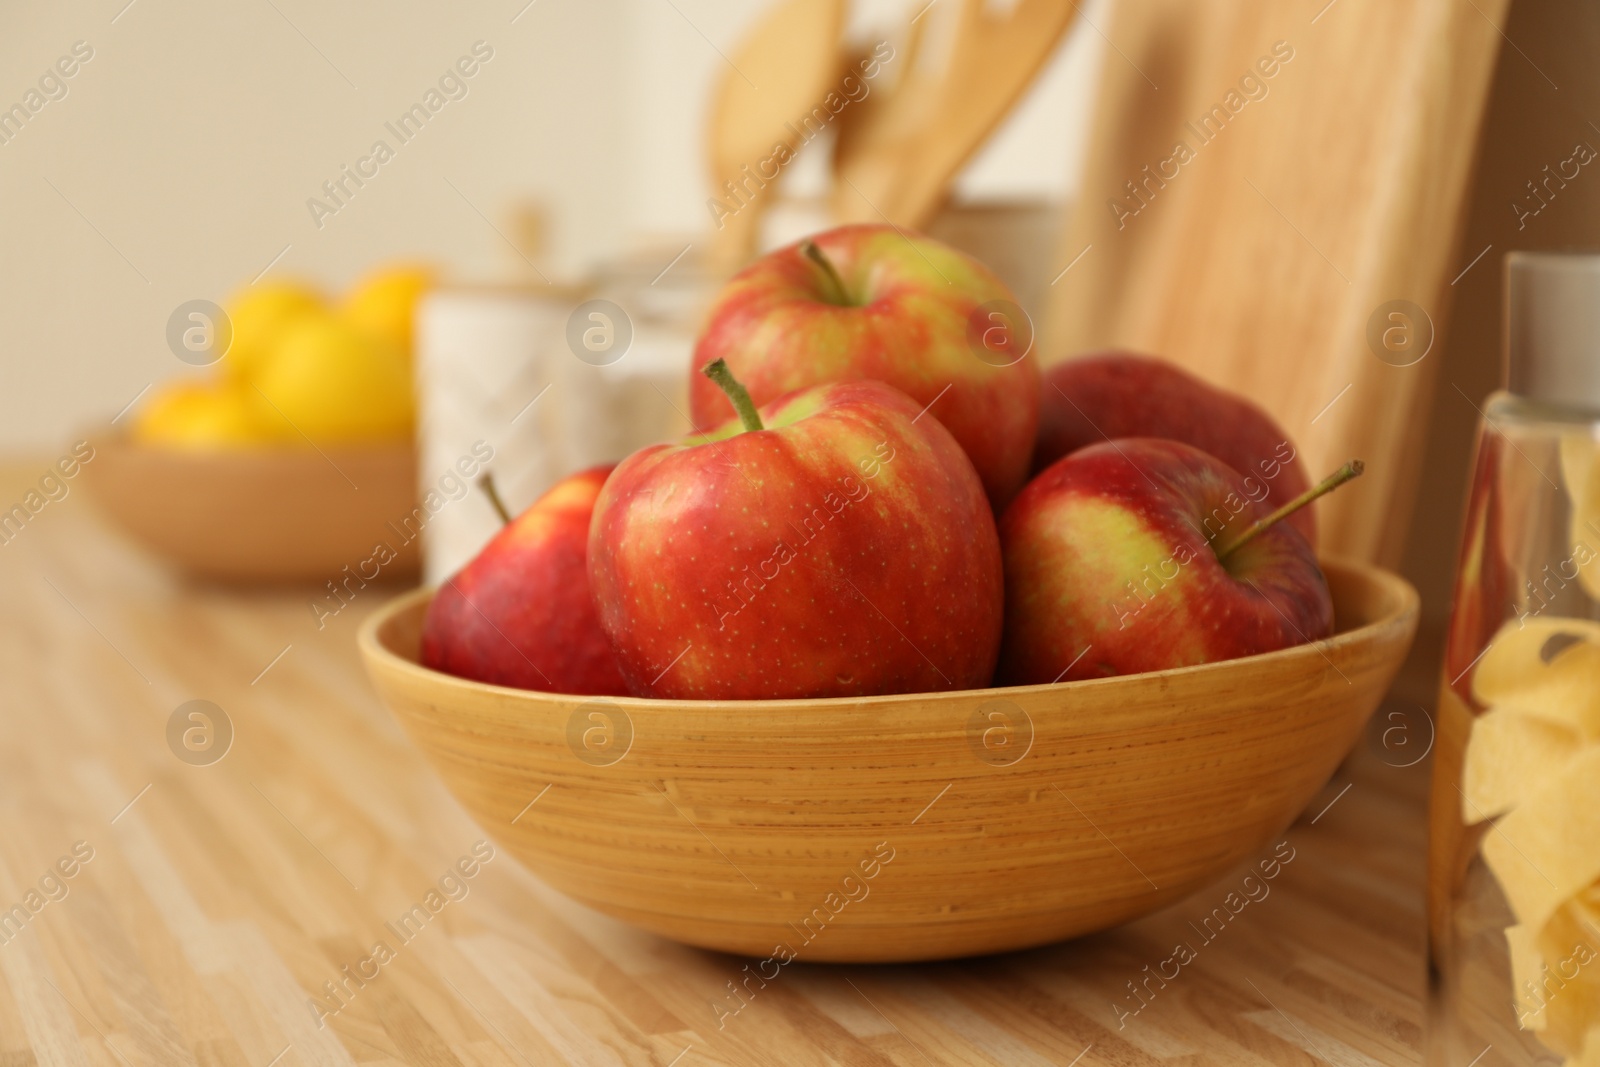 Photo of Apples in bowl on wooden countertop in kitchen. Interior element